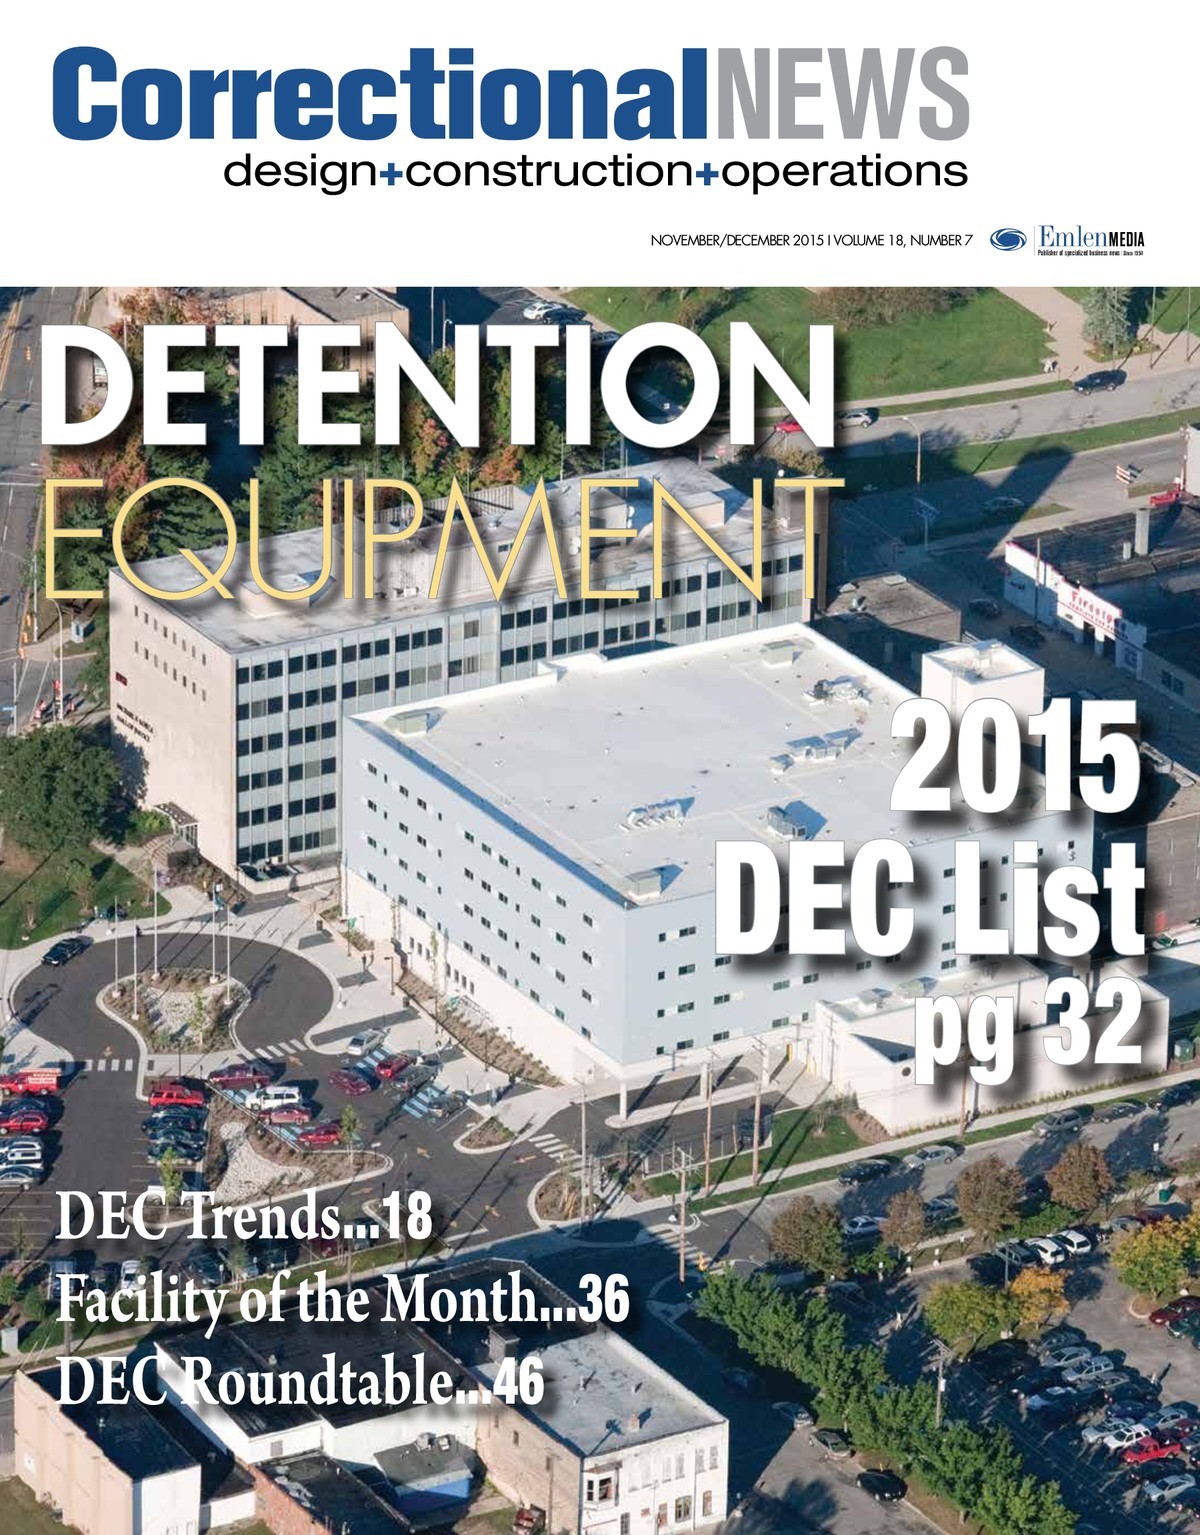 Correctional News Magazine Features New Washington County Sheriff’s Office and Jail